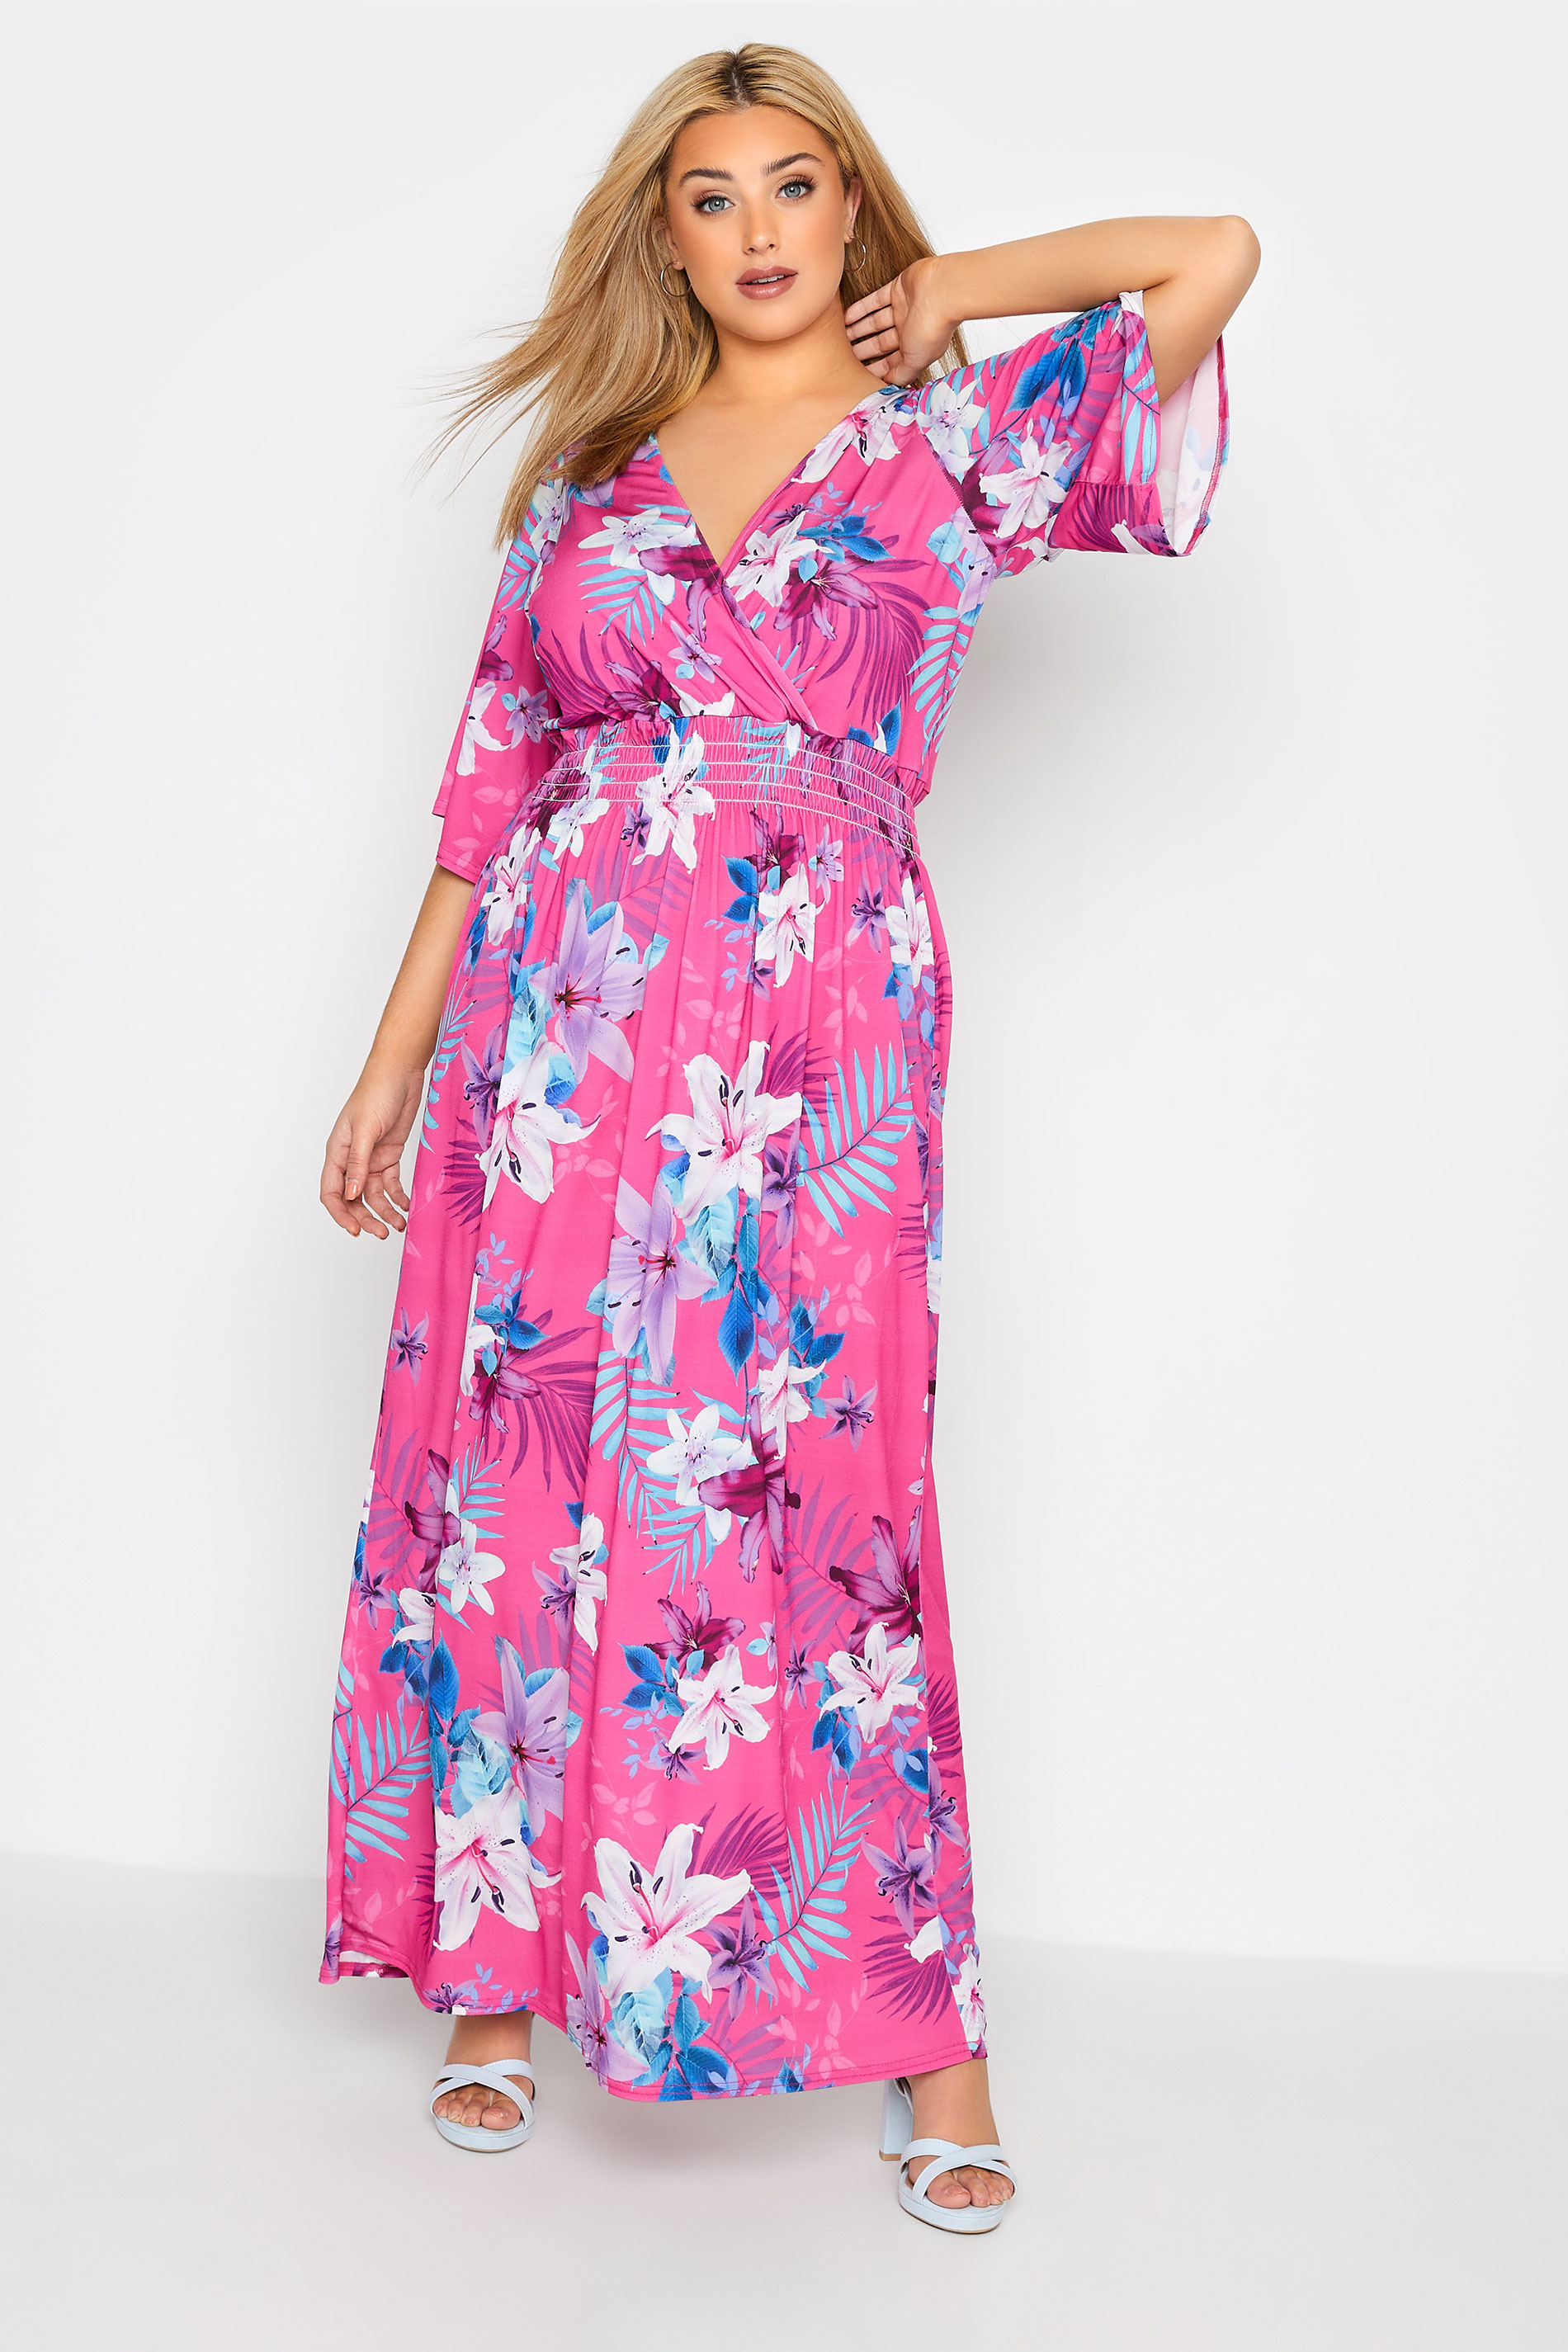 Robes Grande Taille Grande taille  Robes Longues | YOURS LONDON - Robe Rose Maxi Floral Taille Plissée - JS32990